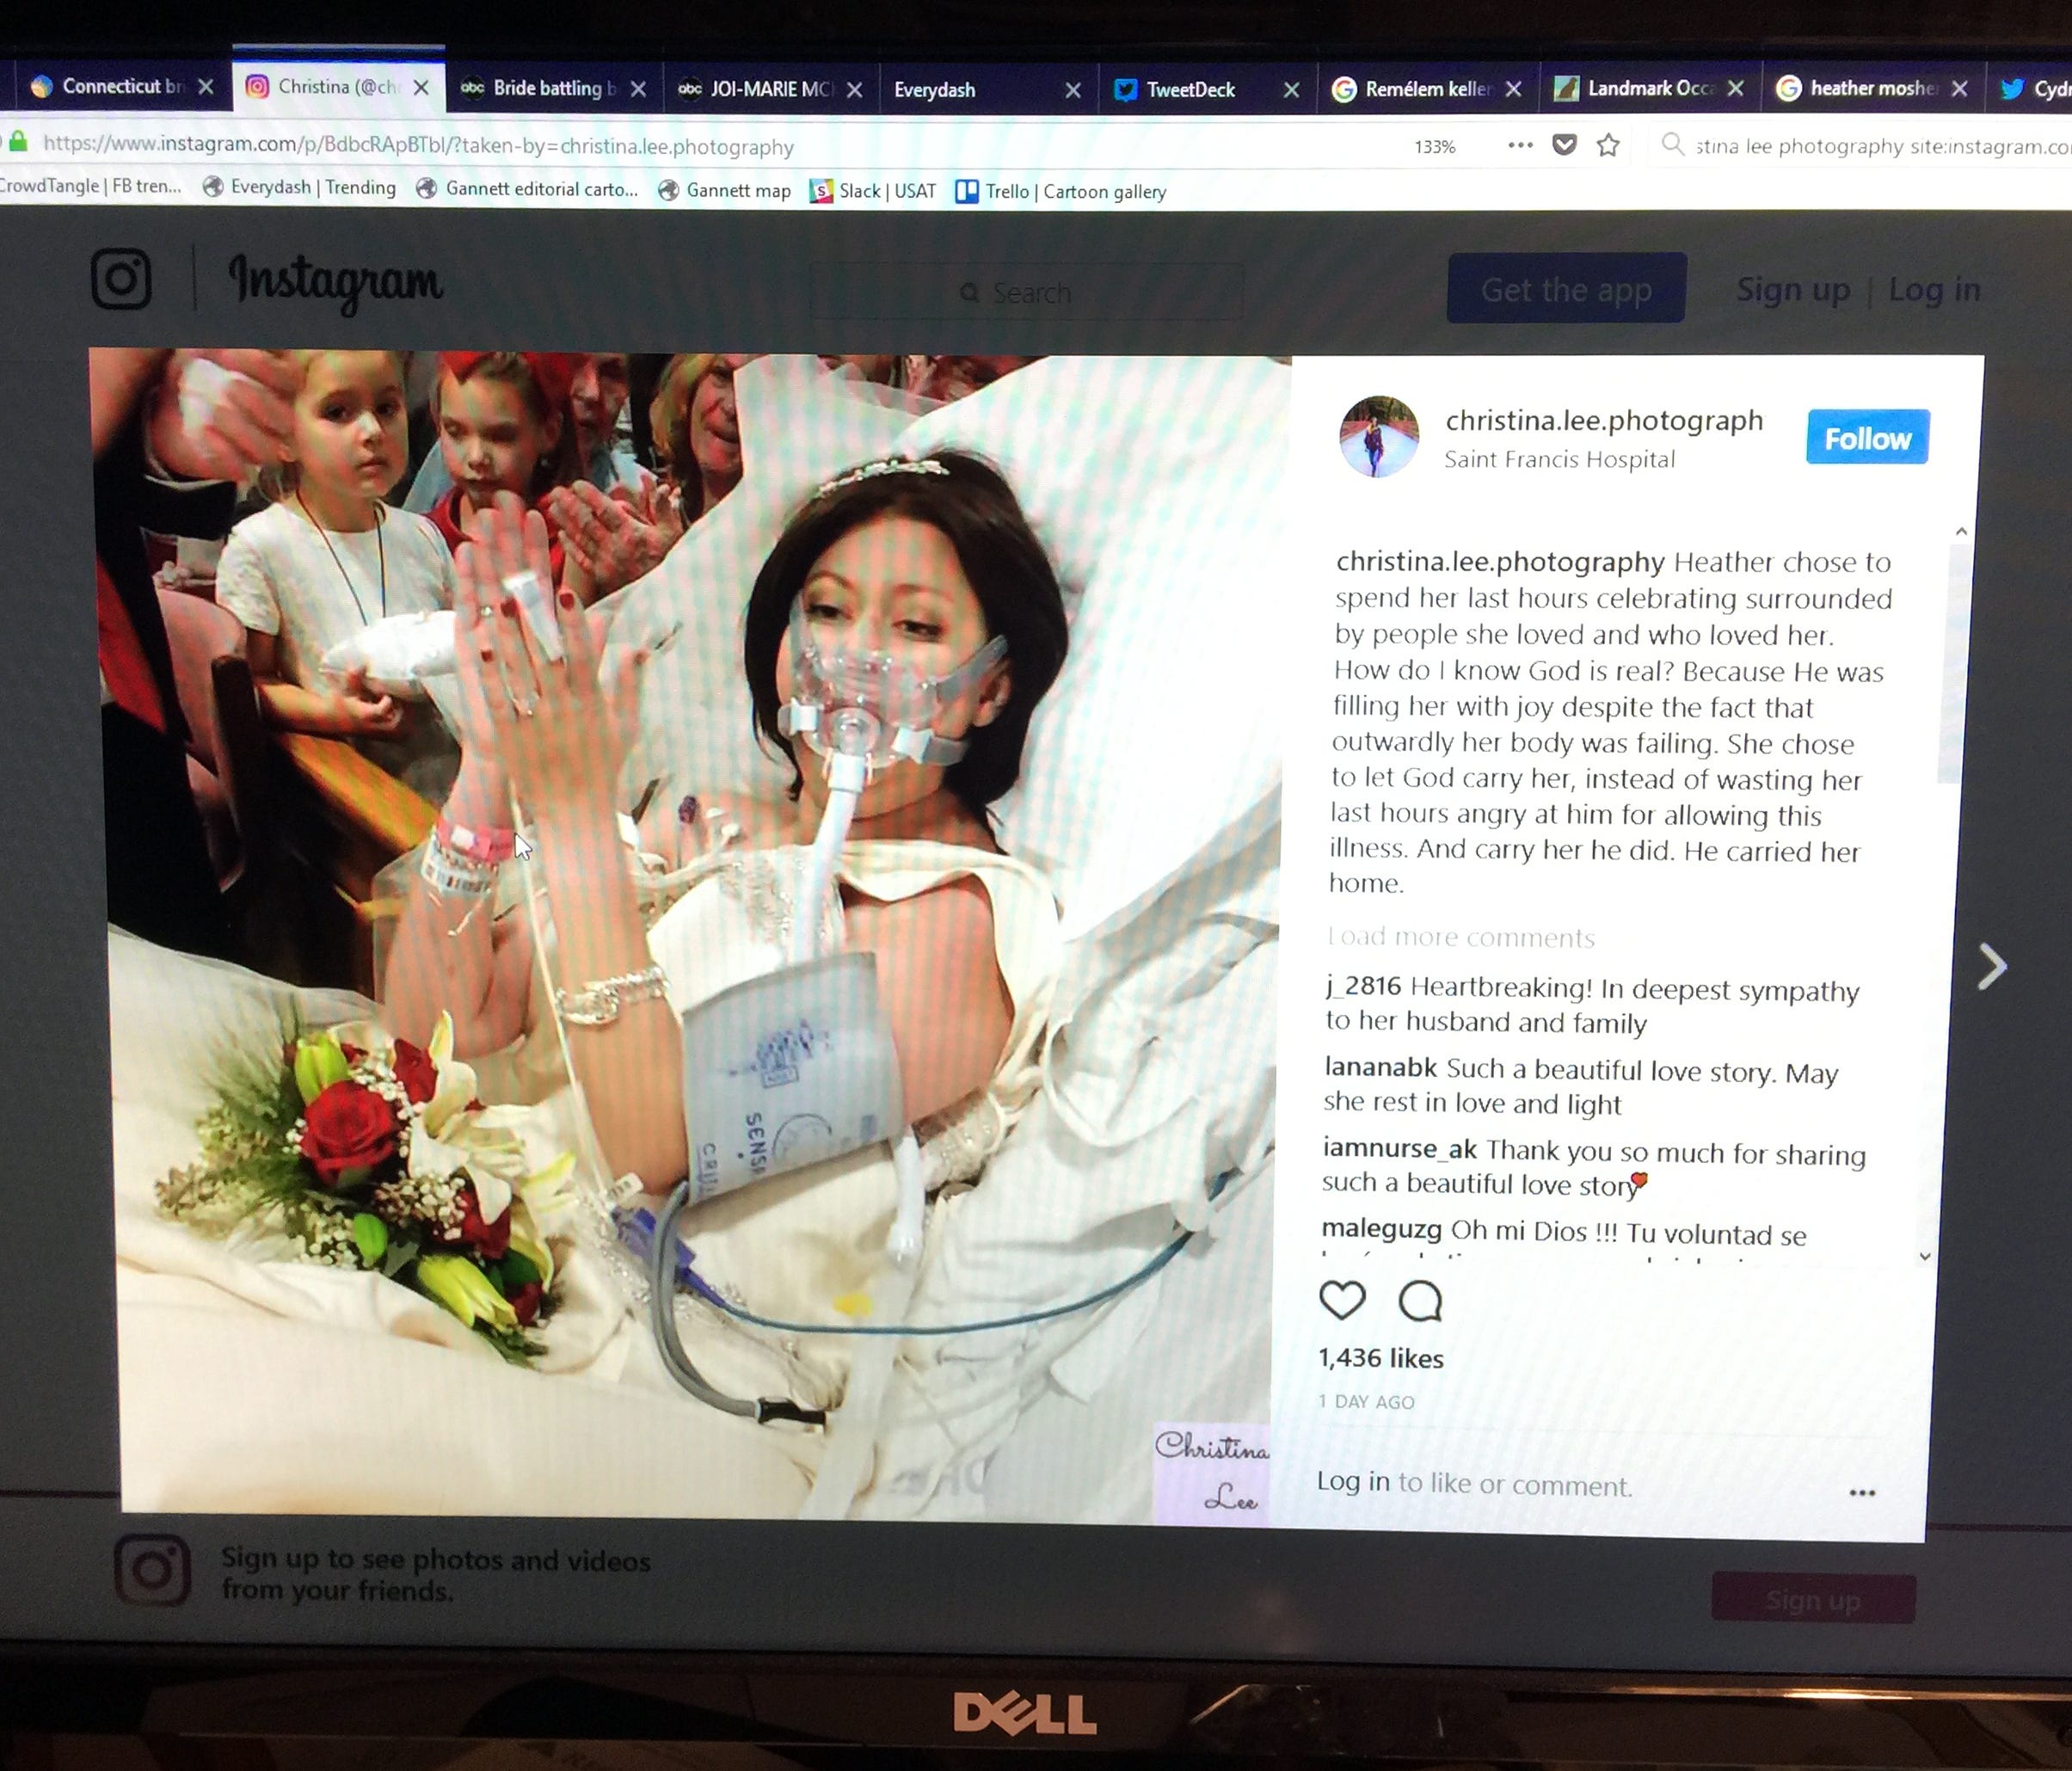 Heather Lindsay Mosher, 31, shown here in a screenshot from Christina Karas'  Instagram account, got married Dec. 22, 2017, a week and a day before she and her fiance originally had planned. She died 18 hours later of an aggressive form of breast can